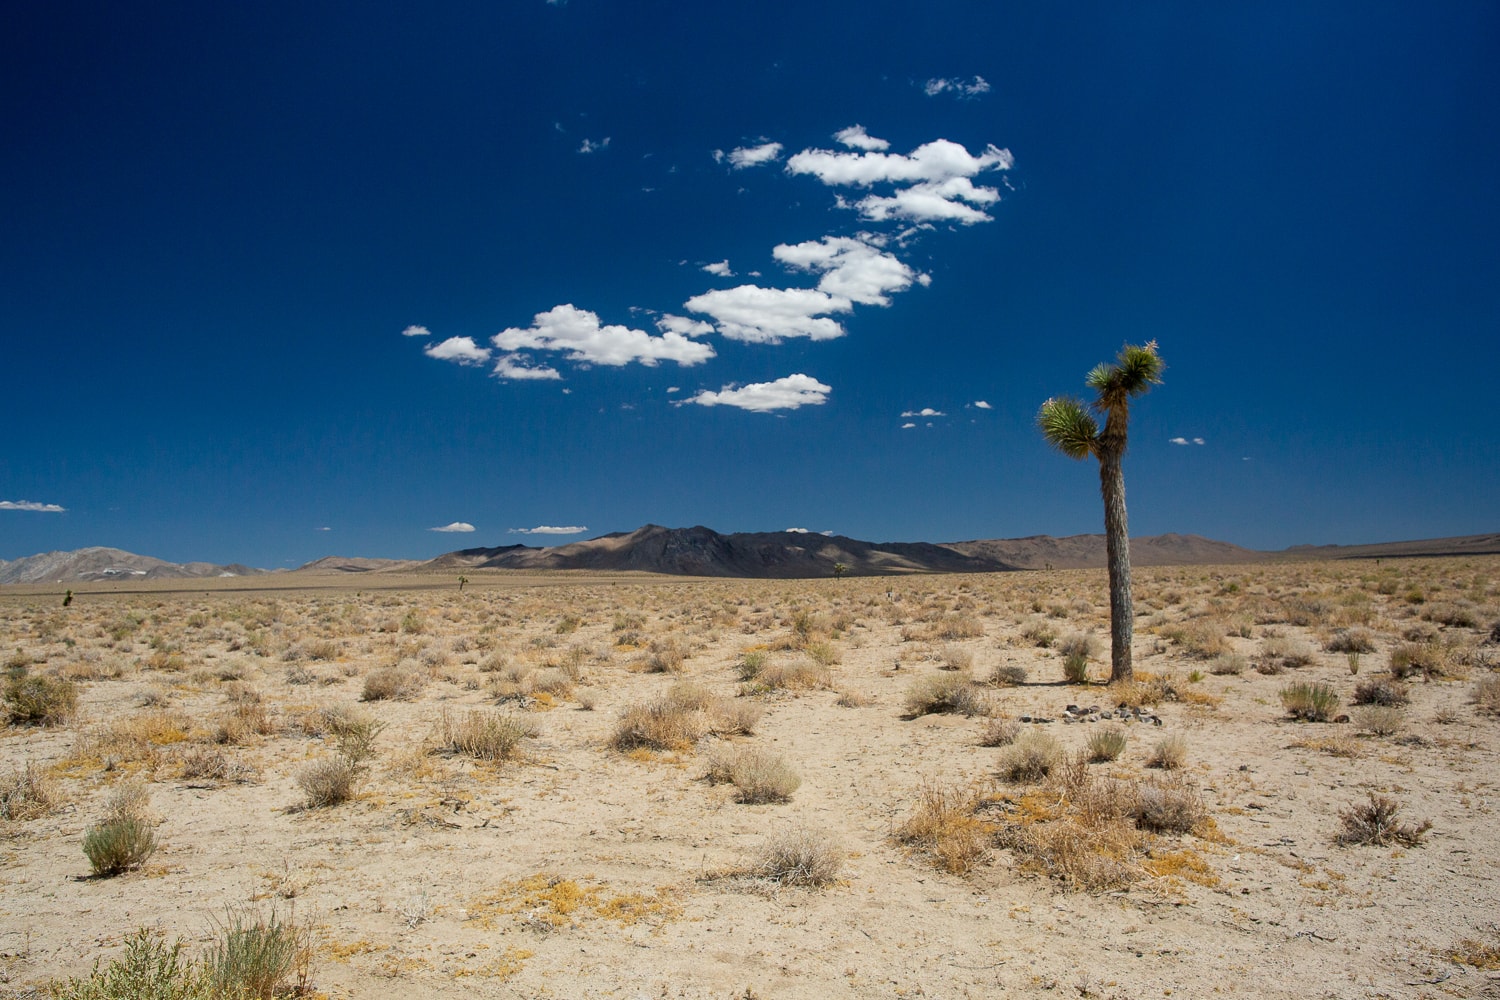 A lone Joshua tree stands in the desert against a blue sky.